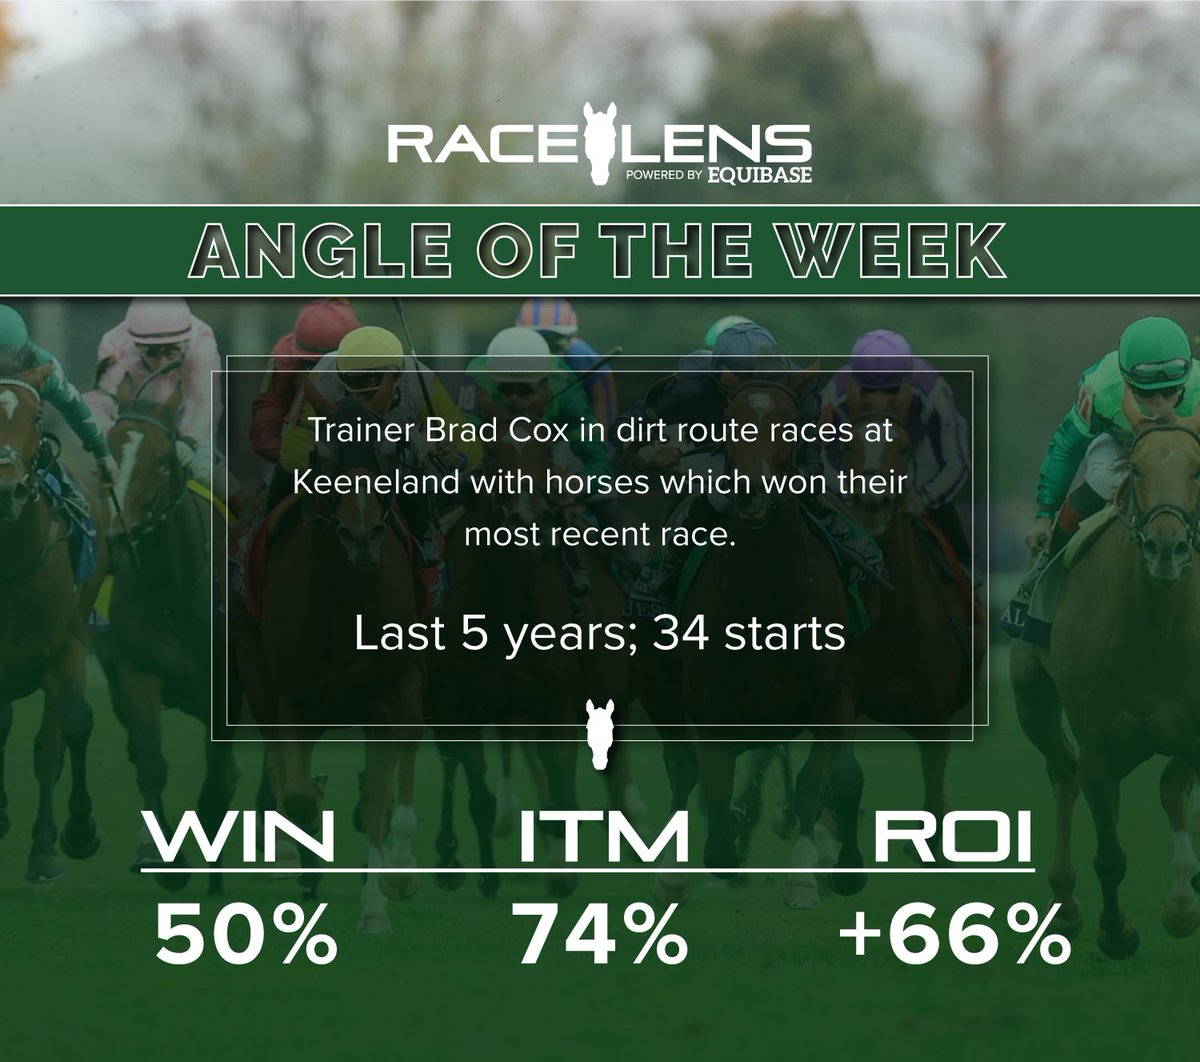 #RaceLens Angle of the Week: @keeneland Race 10 Toyota Blue Grass Stakes (Gr. 1) Post: 5:52pm ET # 11 Encino For more free info on this race: equibase.com/free/index.cfm…